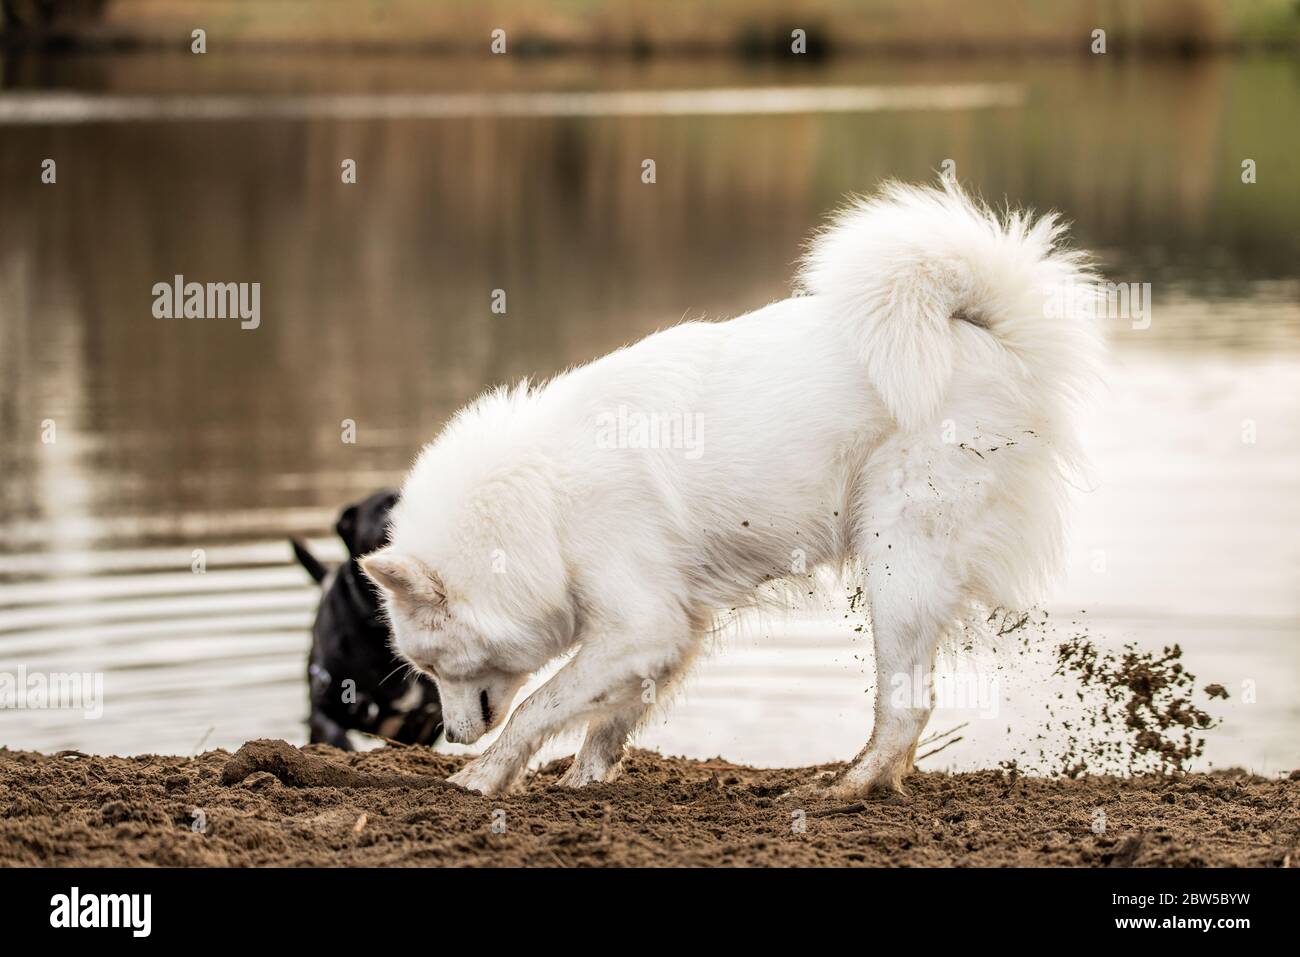 Cute, fluffy white Samoyed dog digs a hole in the dirt Stock Photo